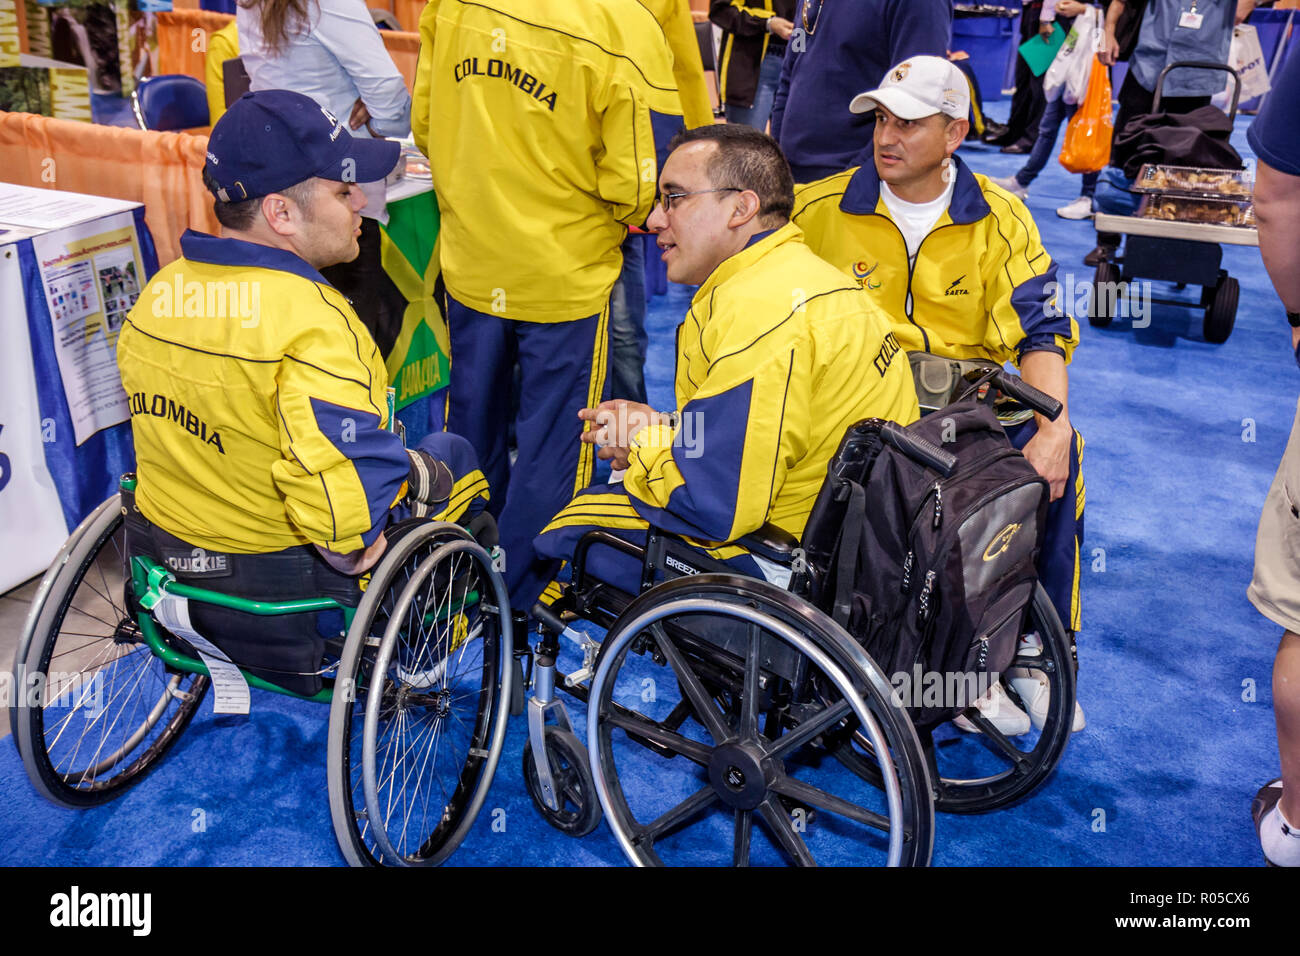 Miami Beach Florida,Miami Beach Convention Center,Centre,Total Health & Fitness Expo,Hispanic man men male adult adults,wheelchair athletes,s,disabled Stock Photo